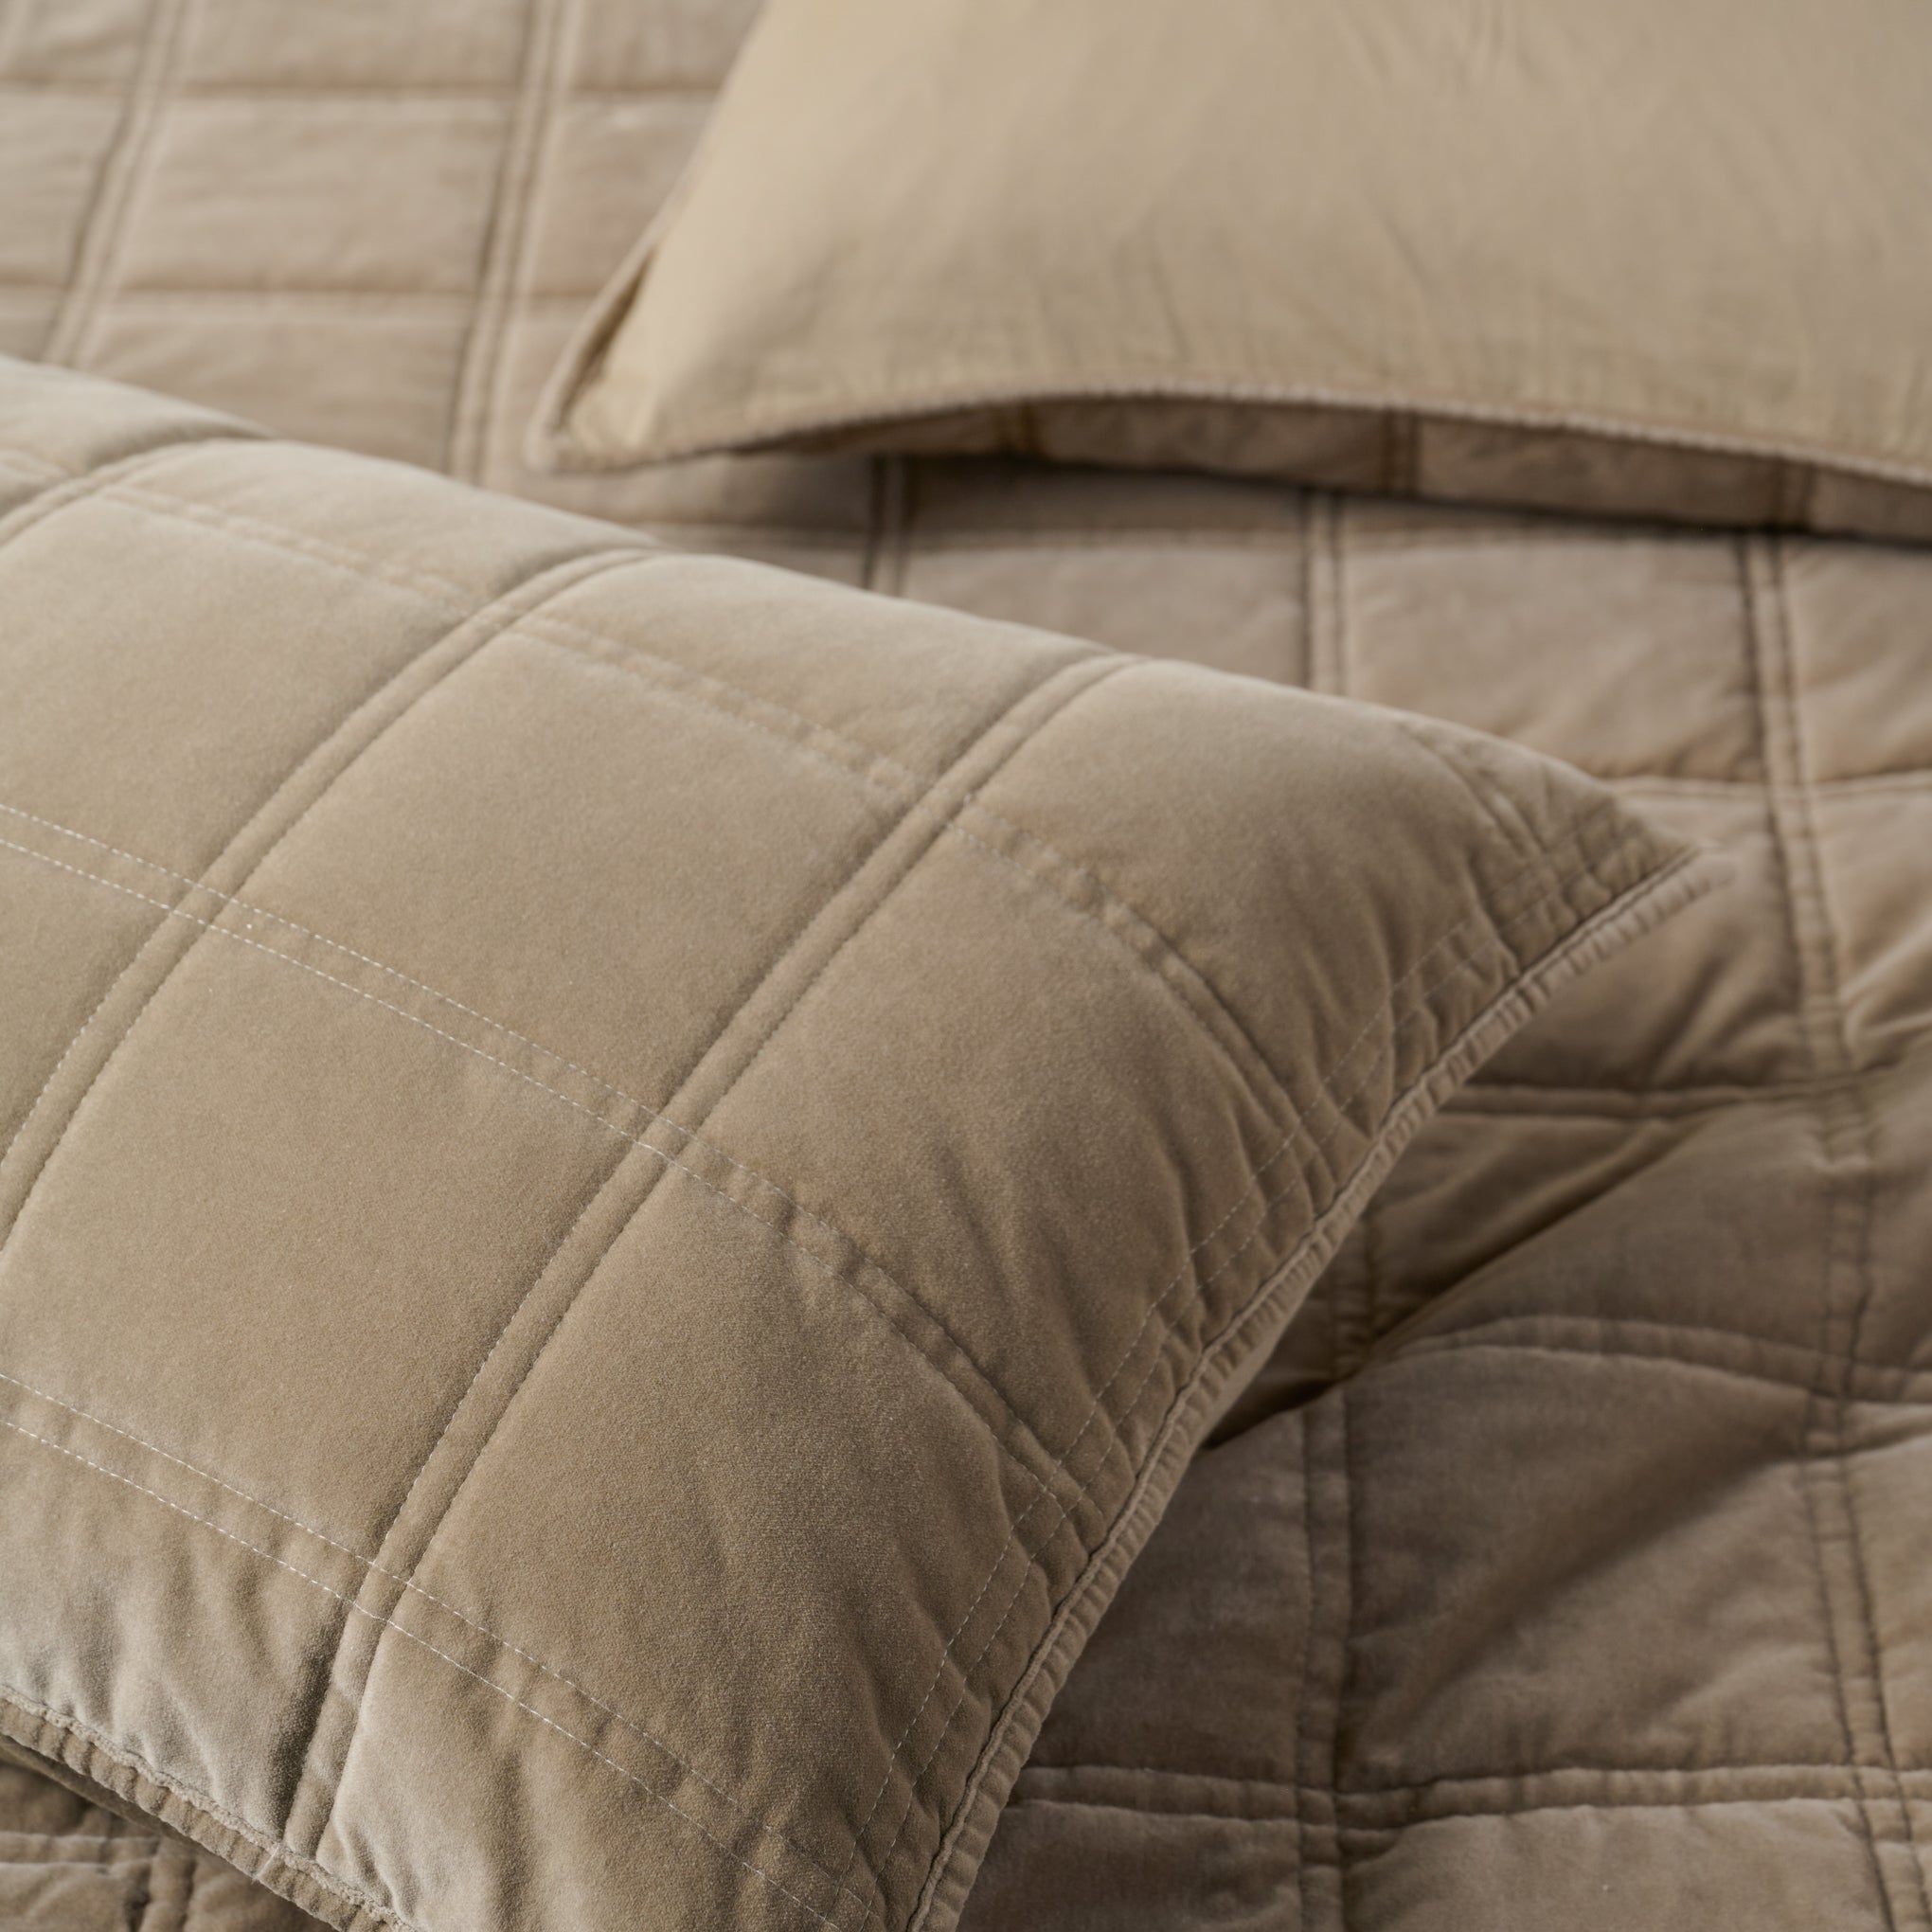 Weekend Velvet Sham - Driftwood on quilt on a bed Items range from $49.00 to $59.00